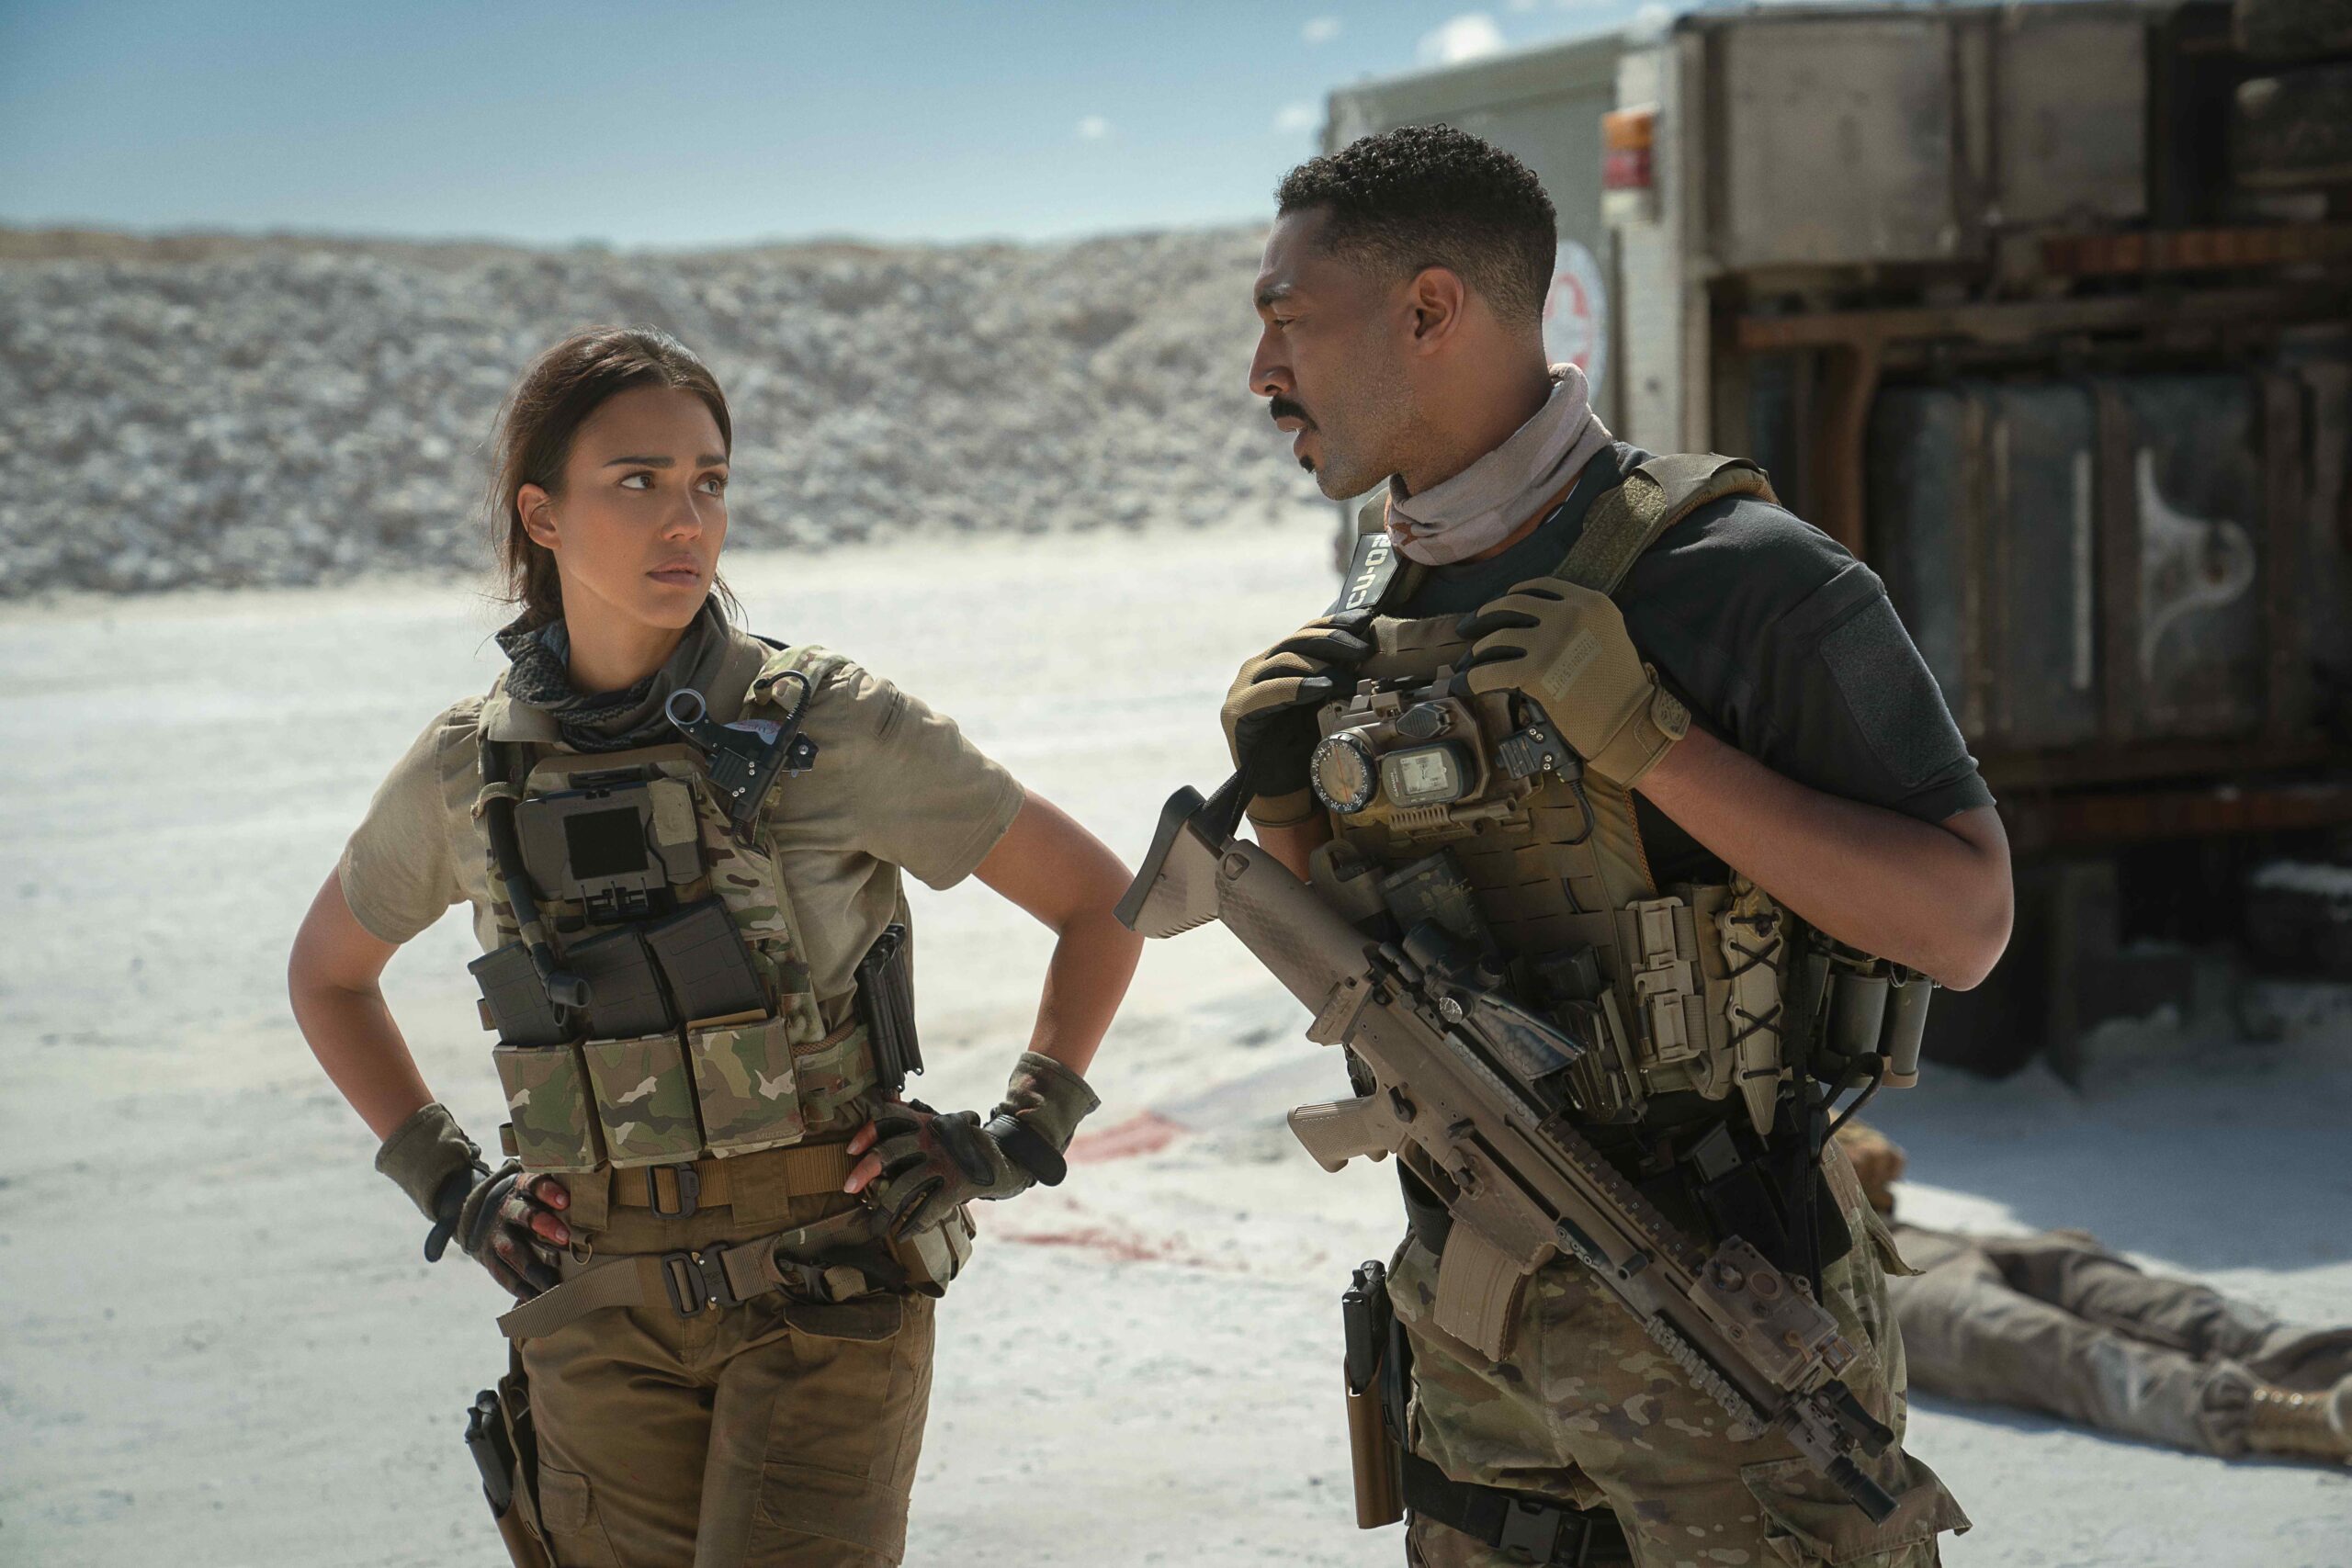 'Trigger Warning' Trailer: Jessica Alba, Tone Bell And More In Netflix Action Film